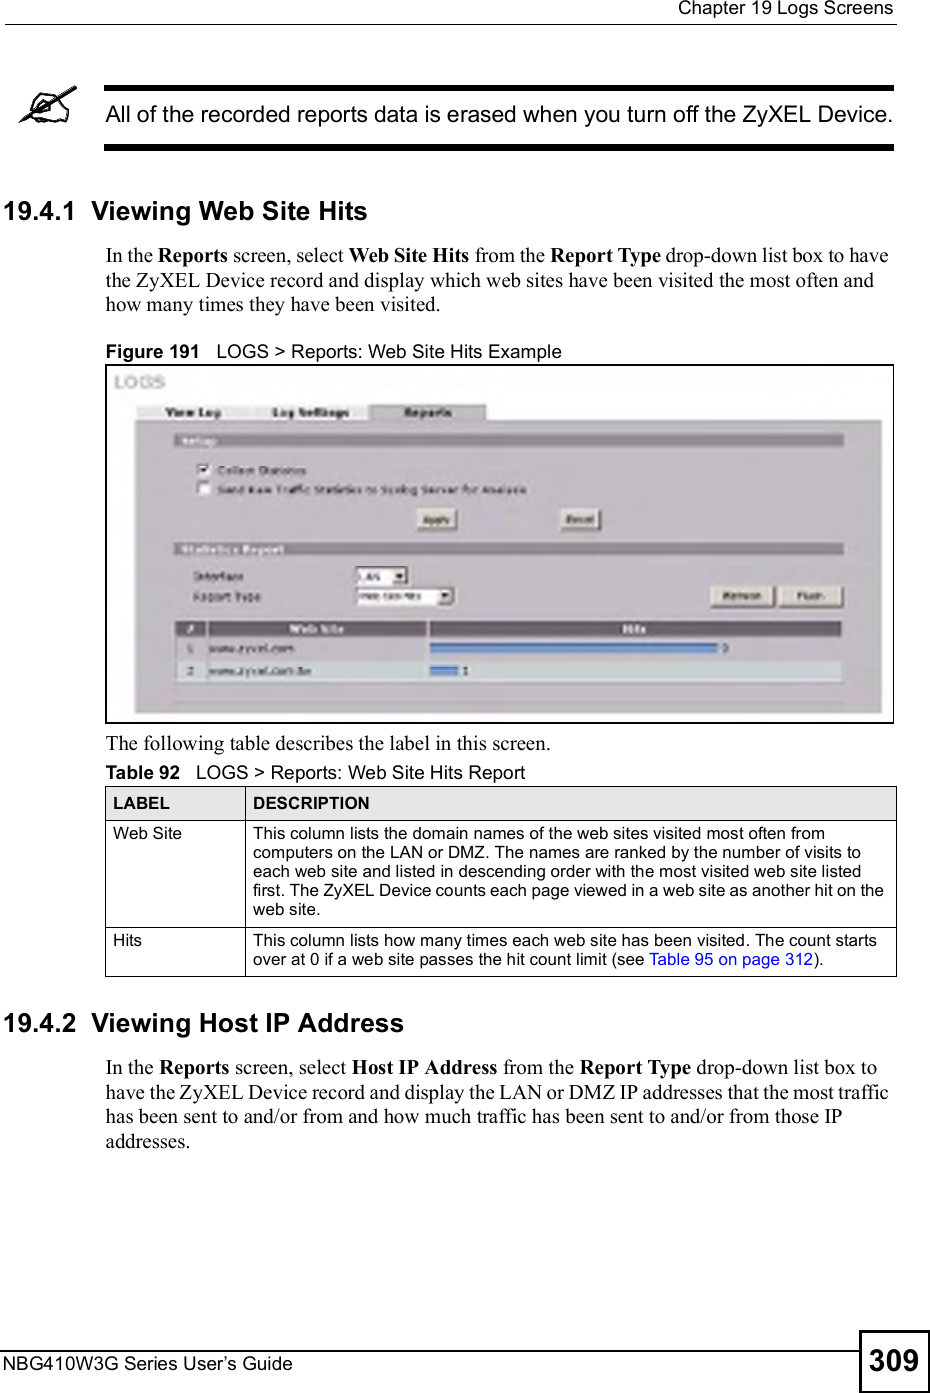  Chapter 19Logs ScreensNBG410W3G Series User s Guide 309All of the recorded reports data is erased when you turn off the ZyXEL Device.19.4.1  Viewing Web Site HitsIn the Reports screen, select Web Site Hits from the Report Type drop-down list box to have the ZyXEL Device record and display which web sites have been visited the most often and how many times they have been visited.Figure 191   LOGS &gt; Reports: Web Site Hits ExampleThe following table describes the label in this screen.19.4.2  Viewing Host IP AddressIn the Reports screen, select Host IP Address from the Report Type drop-down list box to have the ZyXEL Device record and display the LAN or DMZ IP addresses that the most traffic has been sent to and/or from and how much traffic has been sent to and/or from those IP addresses.Table 92   LOGS &gt; Reports: Web Site Hits ReportLABEL DESCRIPTIONWeb Site This column lists the domain names of the web sites visited most often from computers on the LAN or DMZ. The names are ranked by the number of visits to each web site and listed in descending order with the most visited web site listed first. The ZyXEL Device counts each page viewed in a web site as another hit on the web site.Hits This column lists how many times each web site has been visited. The count starts over at 0 if a web site passes the hit count limit (see Table 95 on page 312).